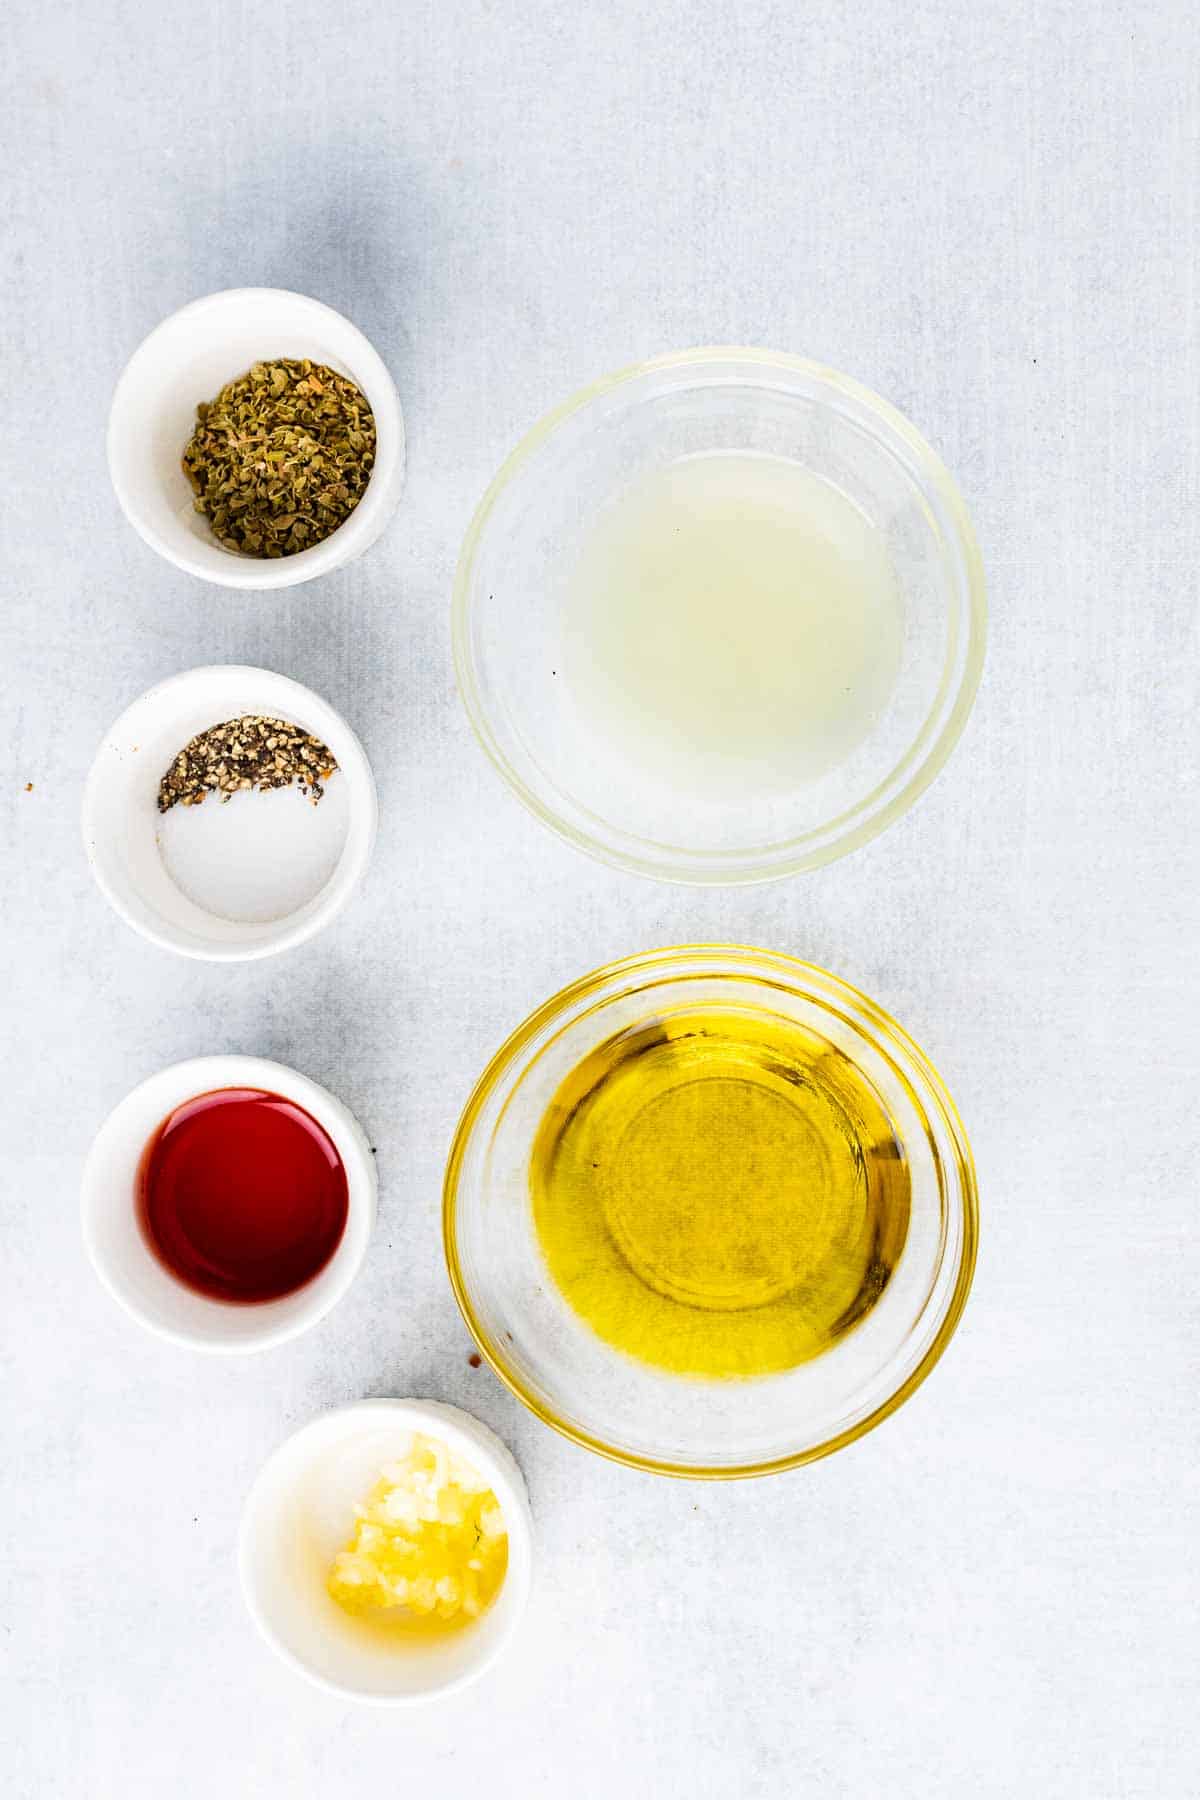 Vinaigrette ingredients in individual bowls on table